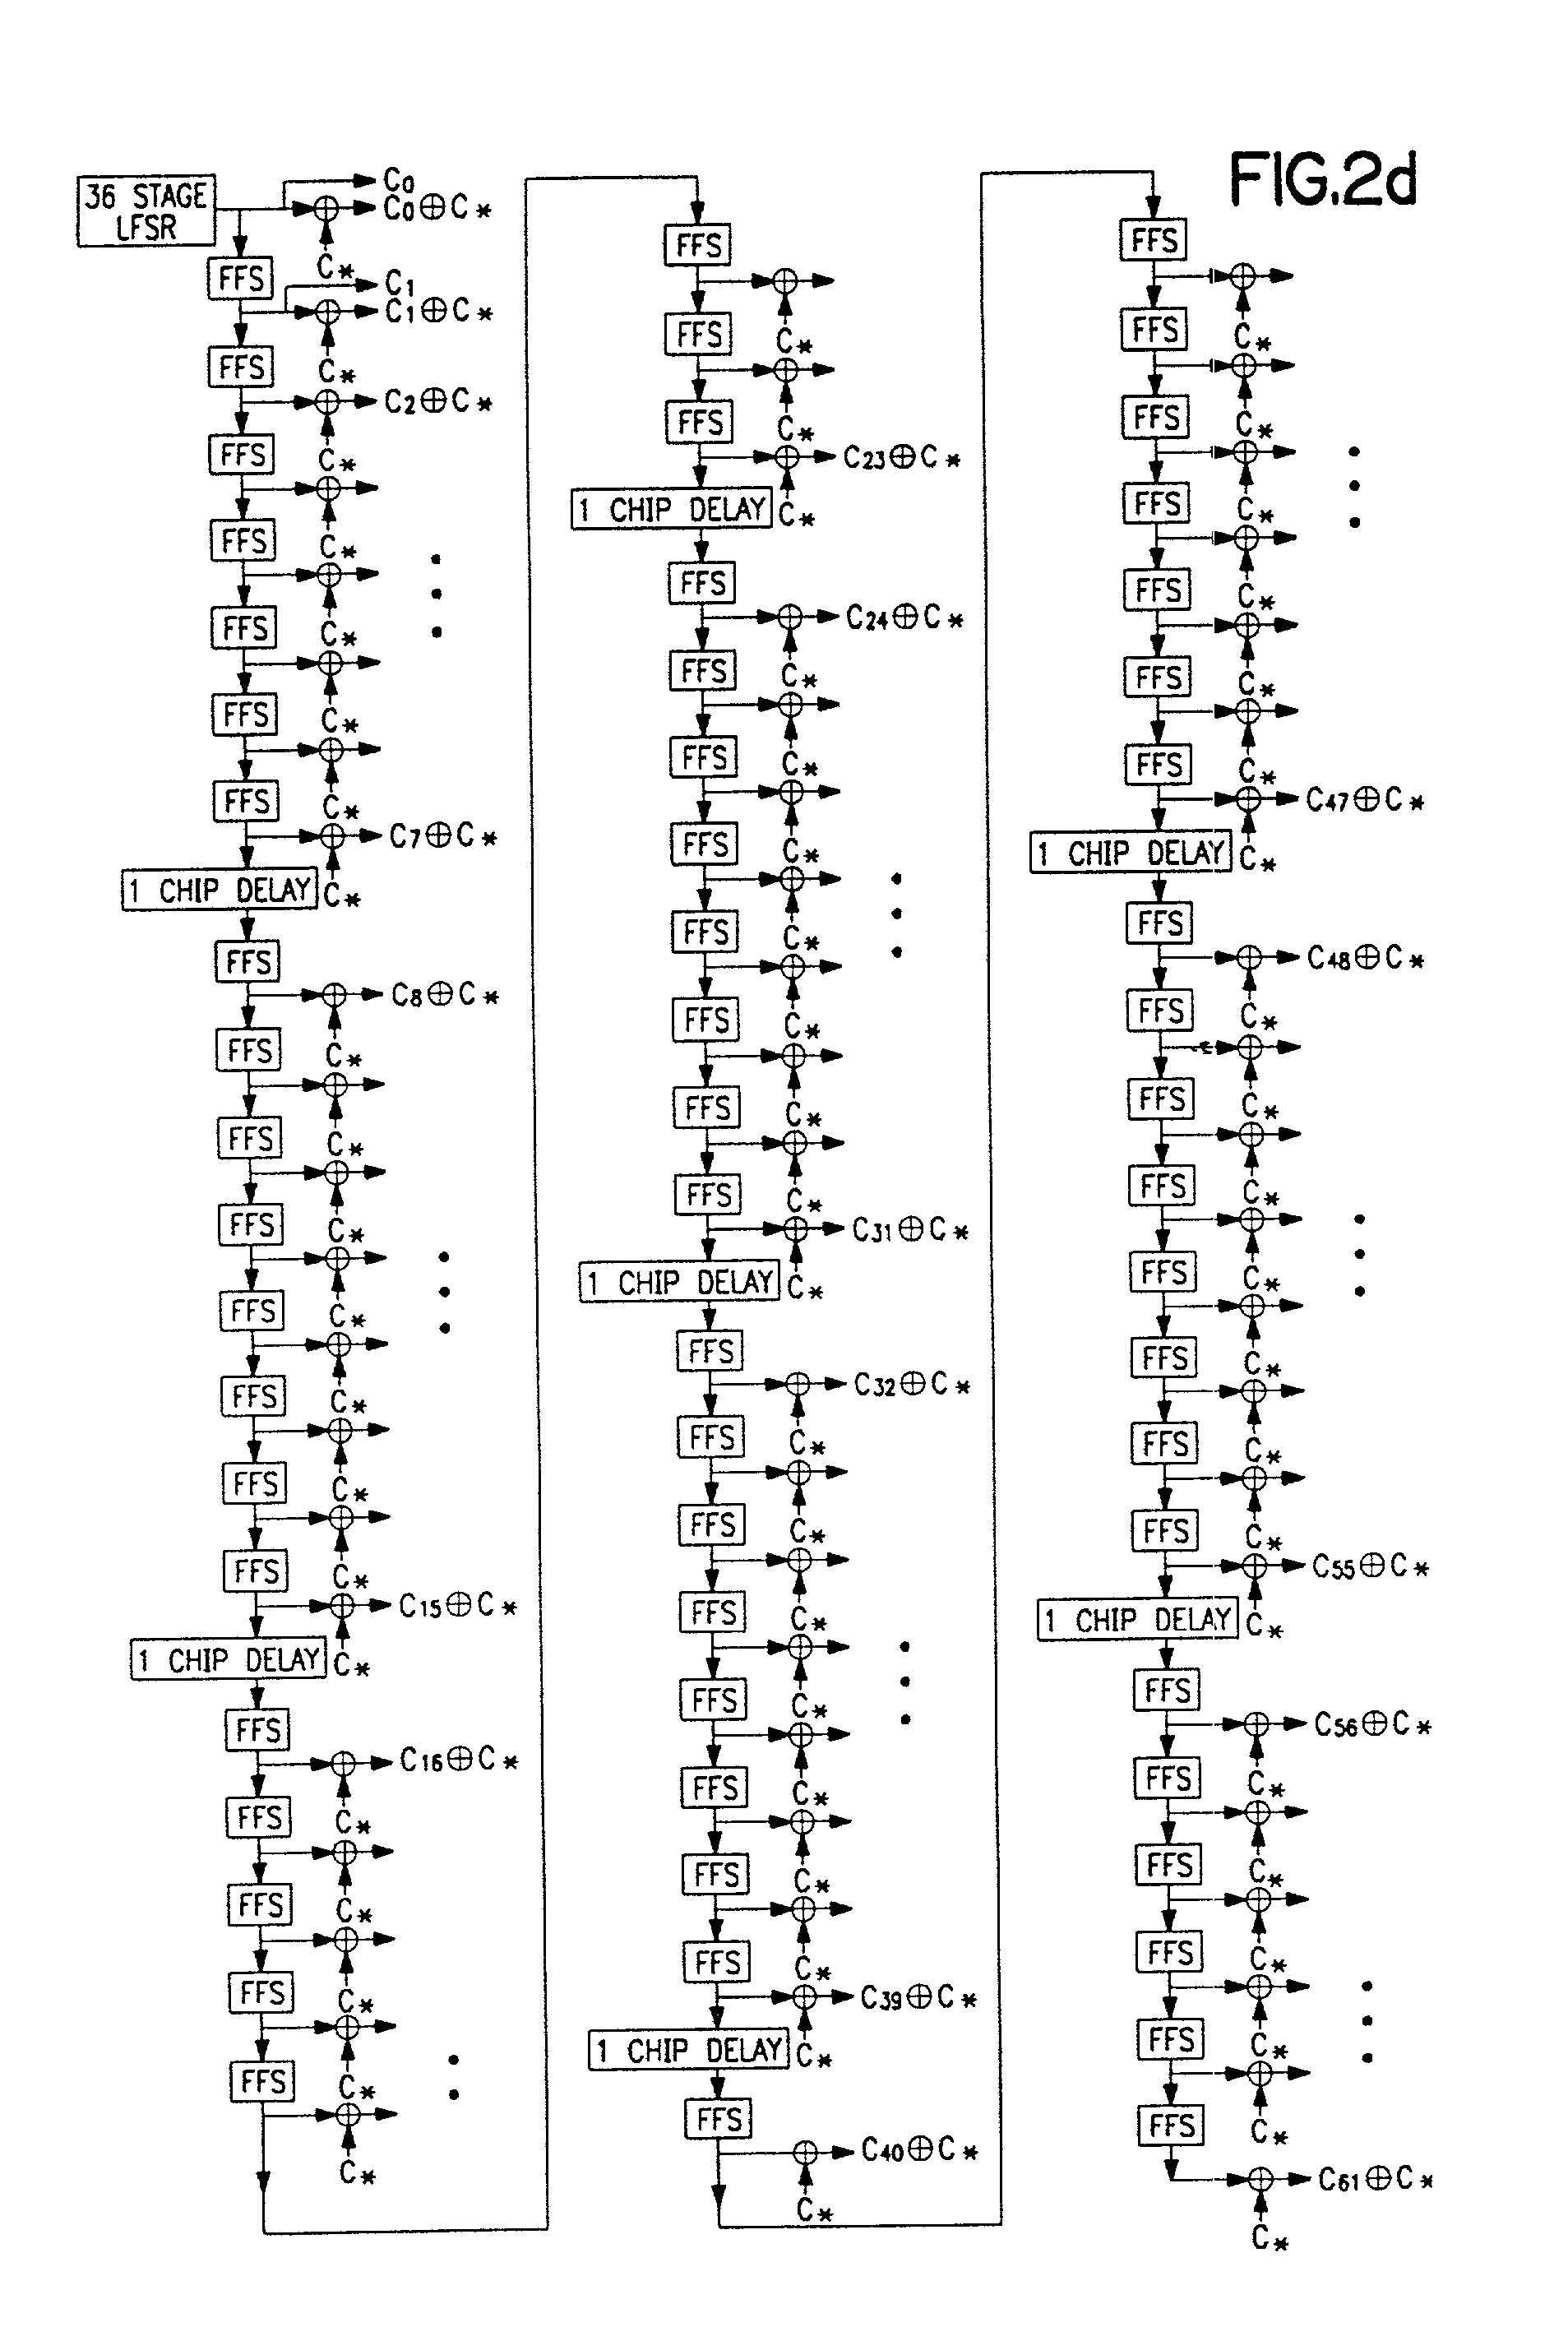 Apparatus for adaptive forward power control for spread-spectrum communications